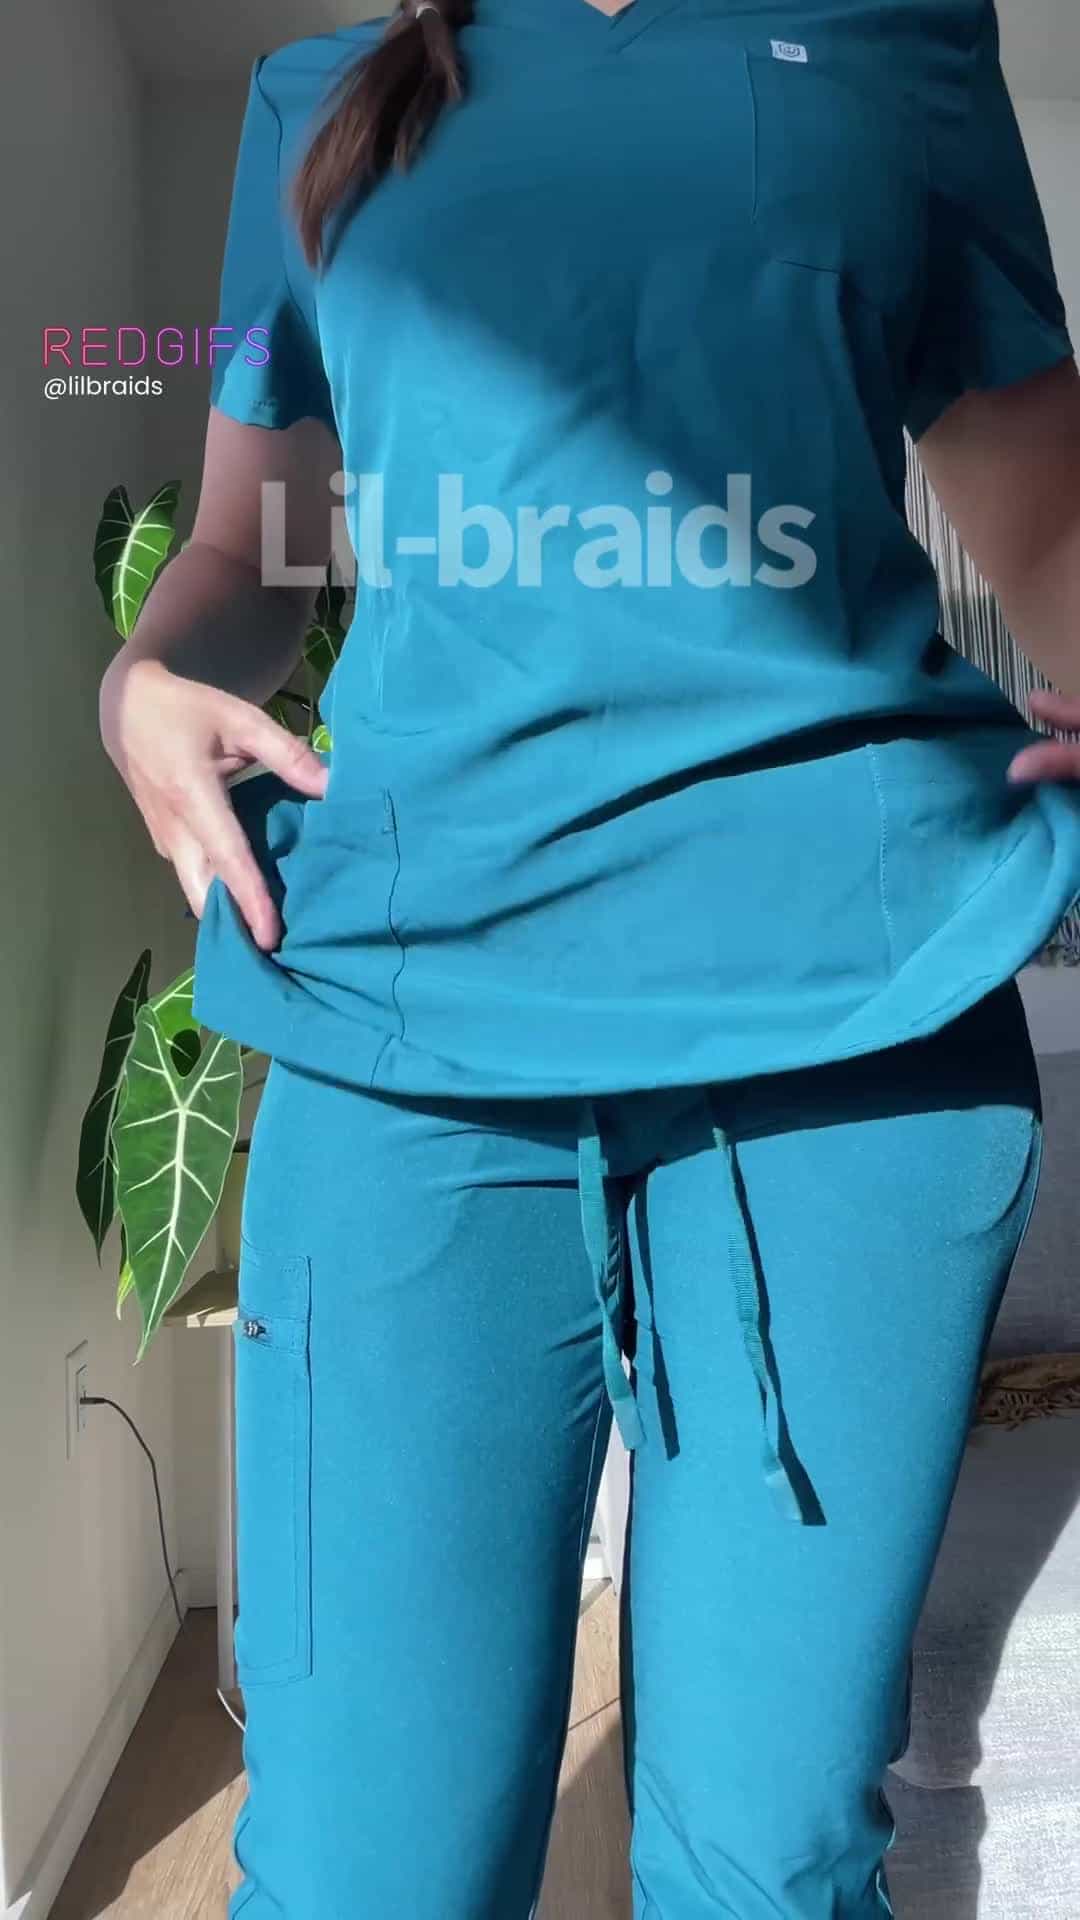 Why do nurses always have big asses?